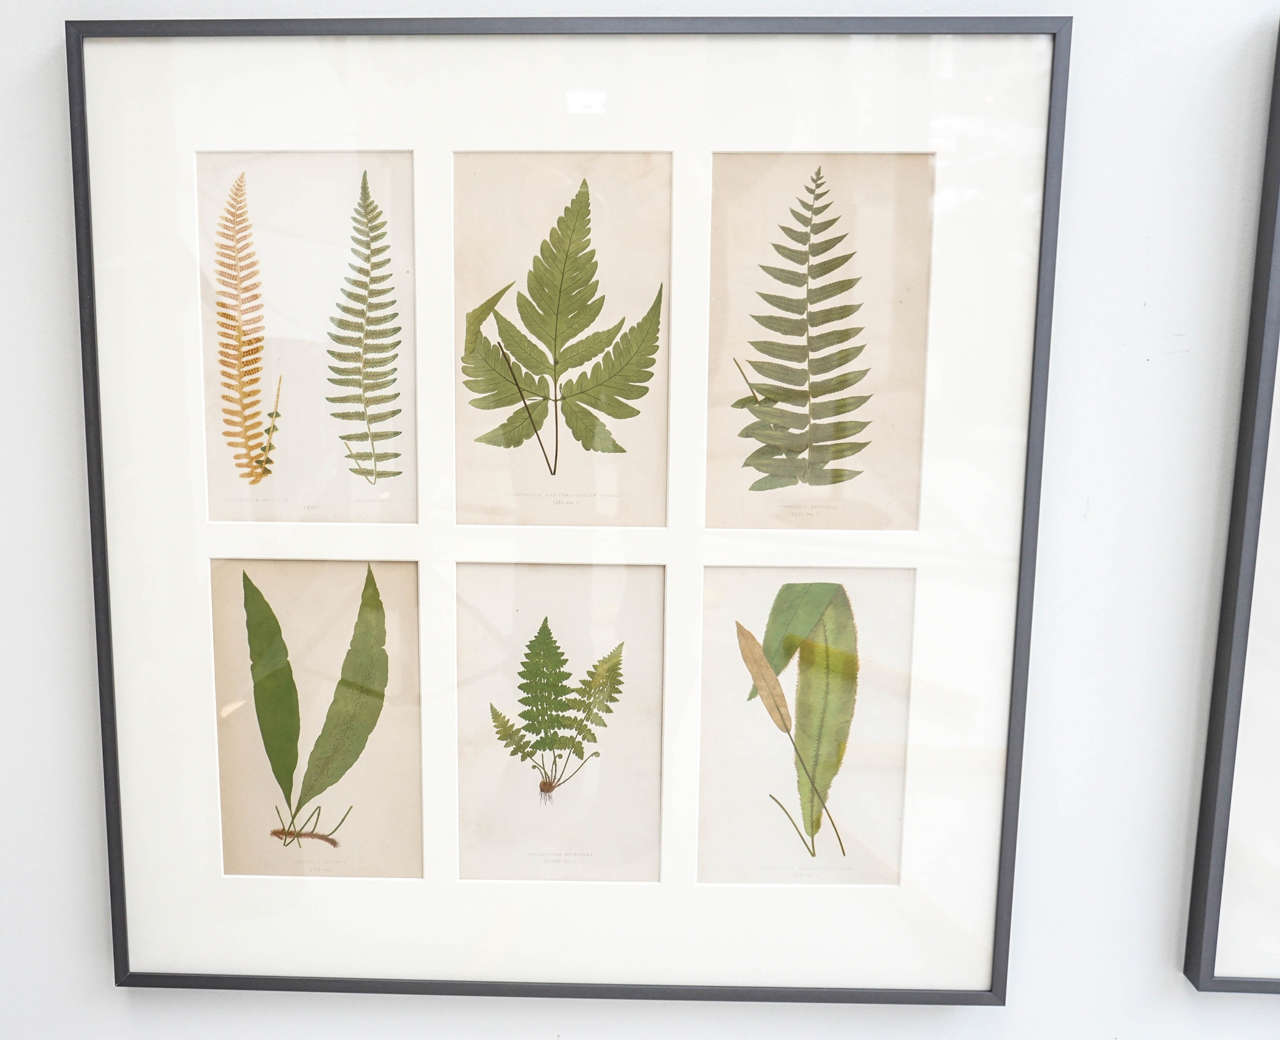 Set of 12 framed plates of ferns, 72 different hand colored engravings.
Alexander Francis Lydon engraver, Benjamin Fawcett woodblock color painter, circa 1865, newly matted, gun metal framing.